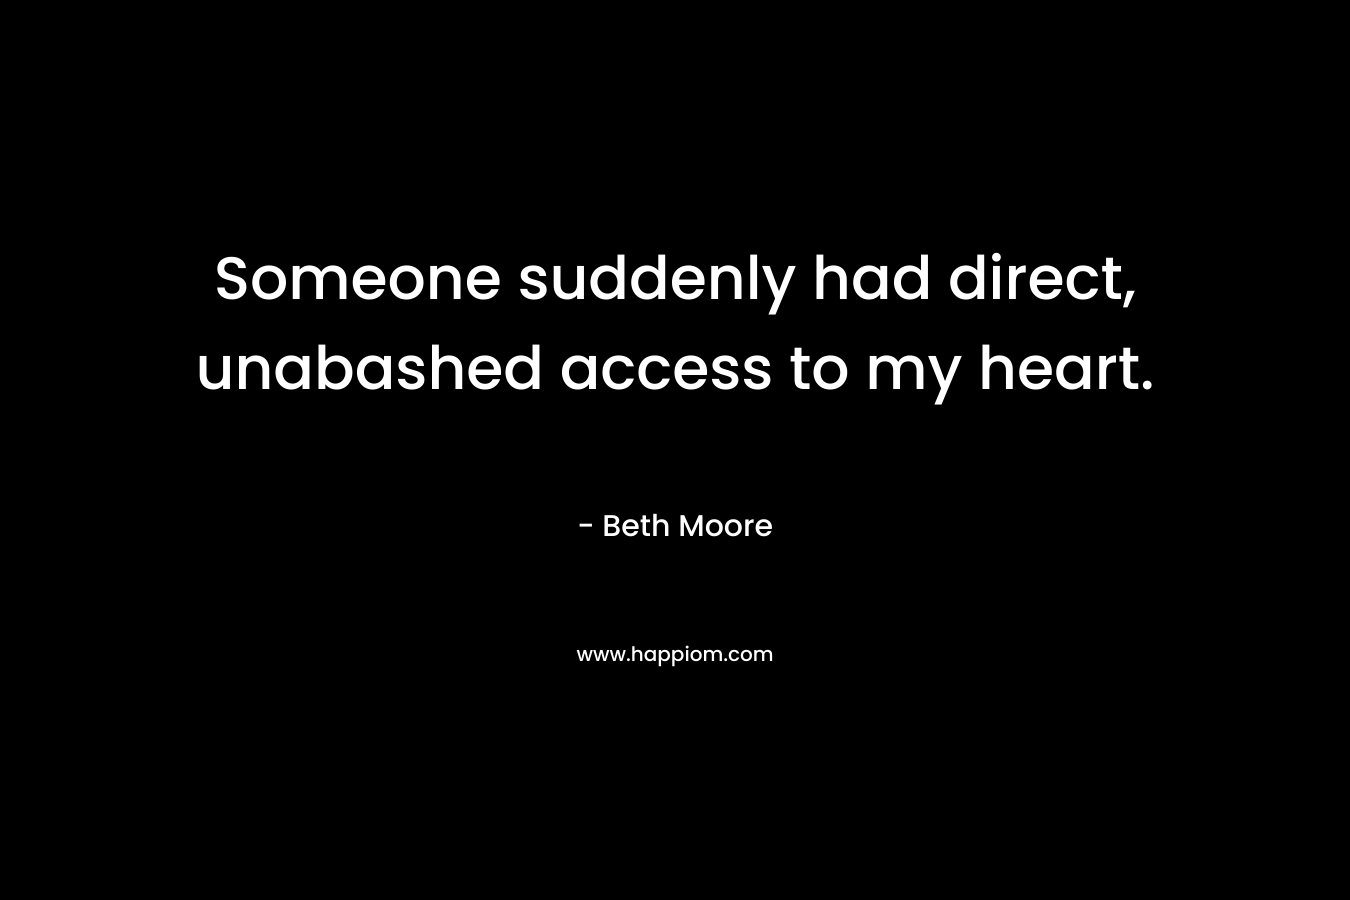 Someone suddenly had direct, unabashed access to my heart. – Beth Moore